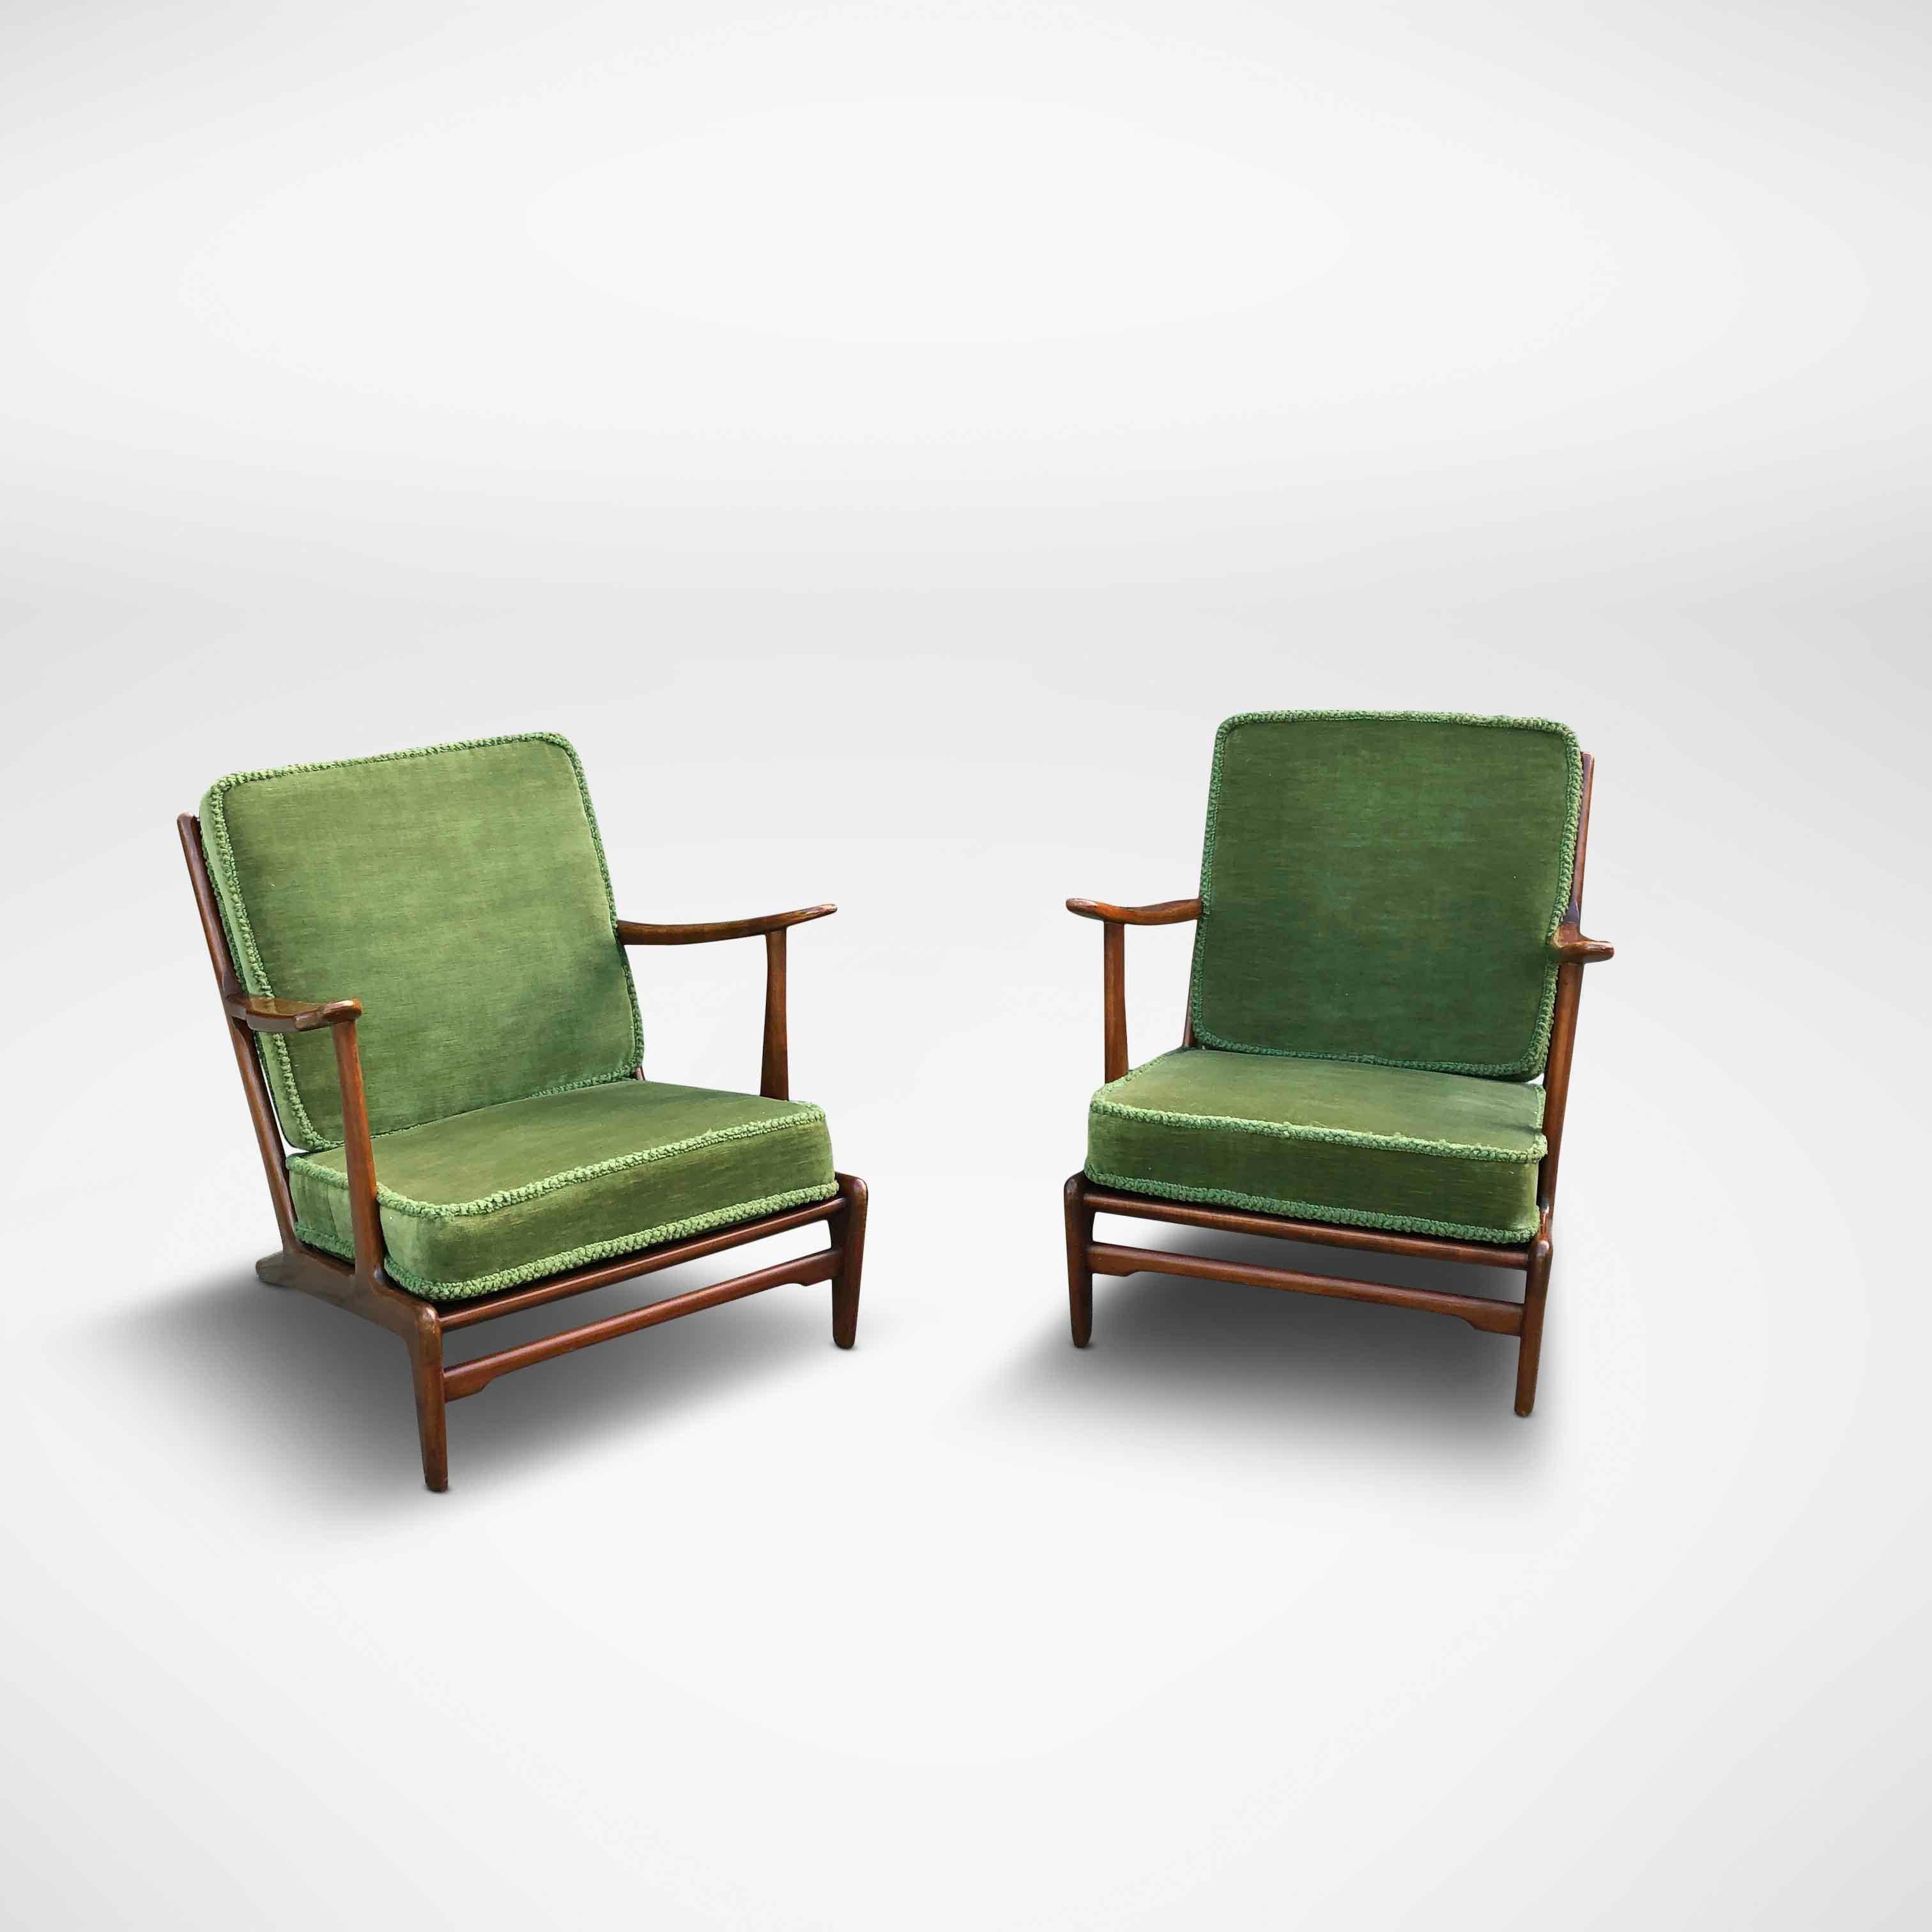 A unique set consisting of 2 x one-seater and 1 x three-seater. The set has clear influences of the Ercol style and is most likely from the UK. The seats are still in excellent condition and are still very firm. The green cushions have an